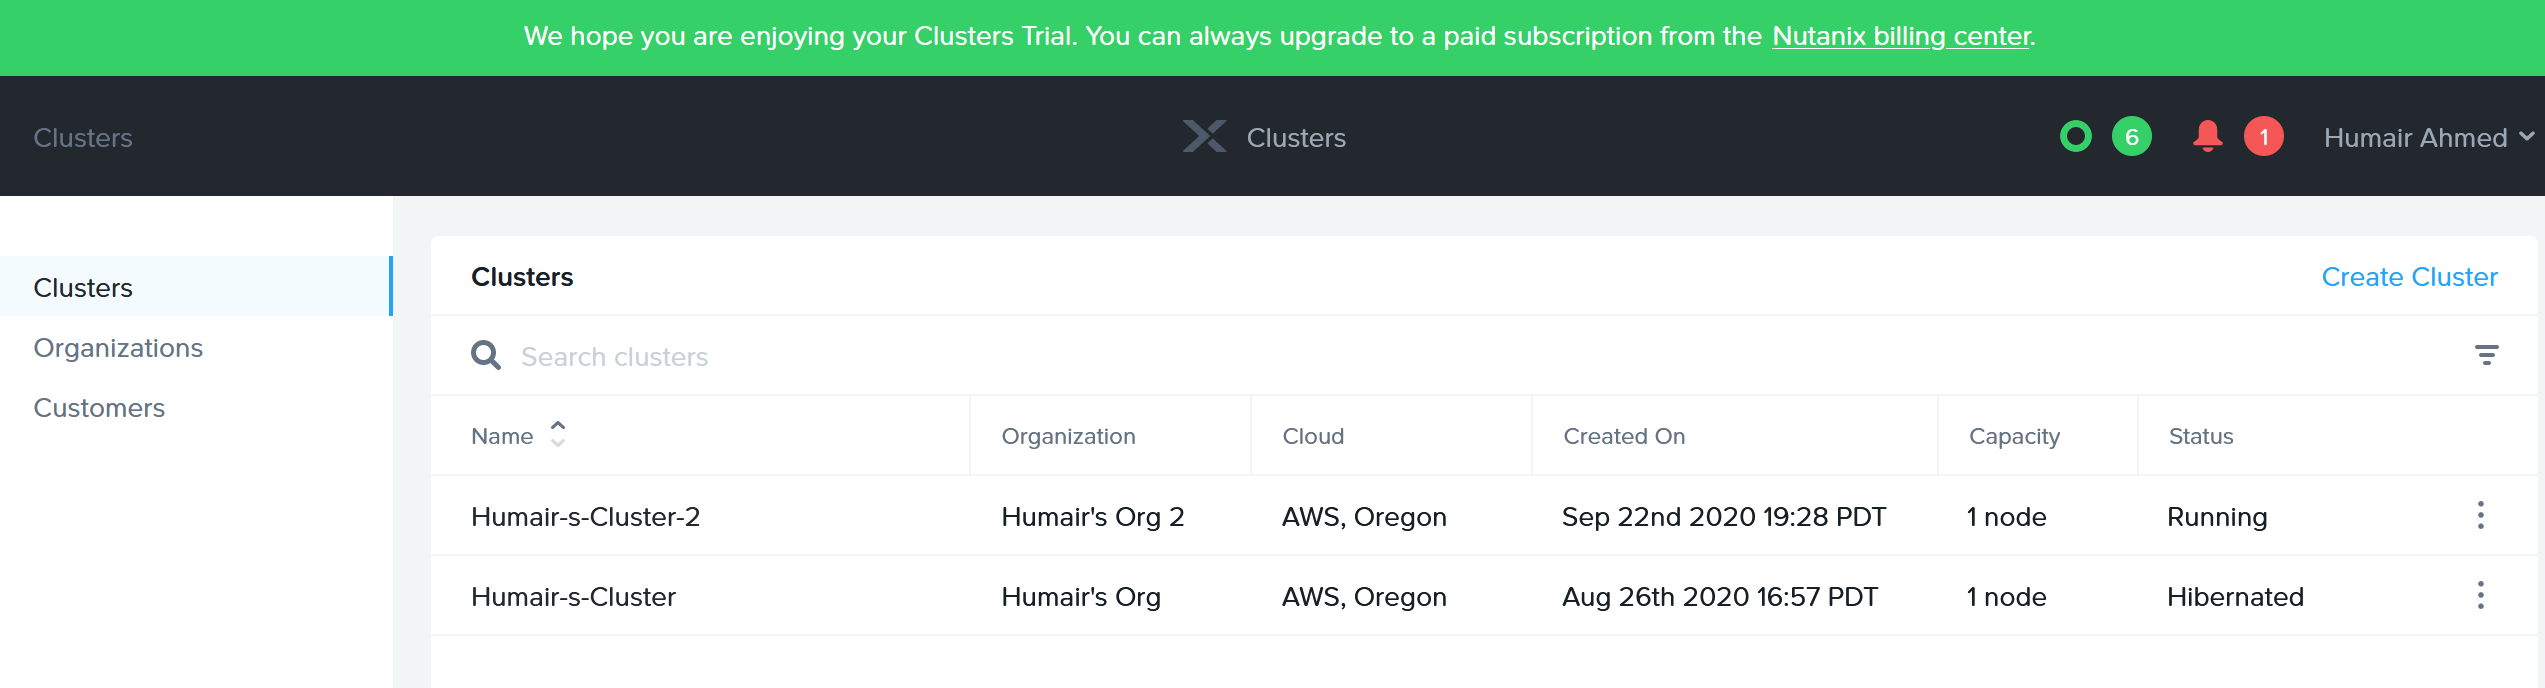 Nutanix Clusters on AWS - 'Humair-s-Cluster-2' Cluster Running